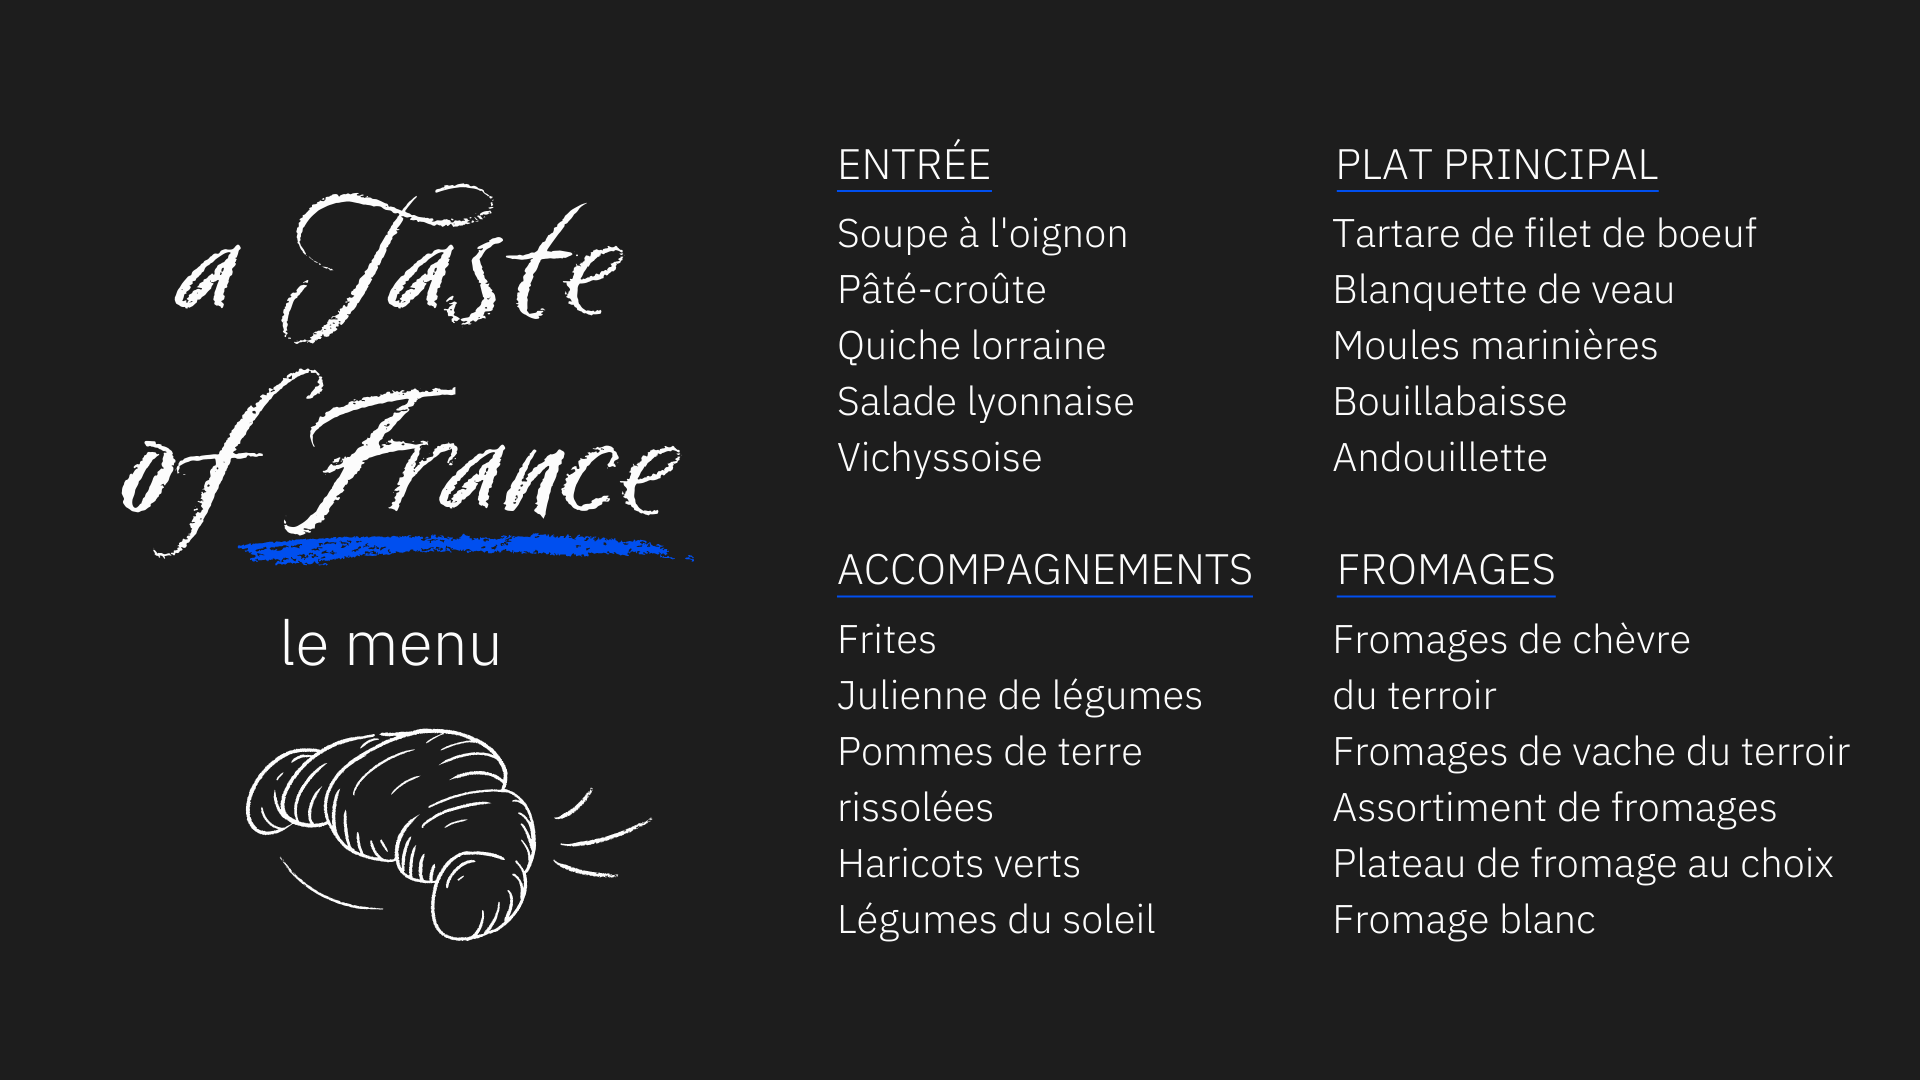 How to order food in French with our restaurant menu in French.